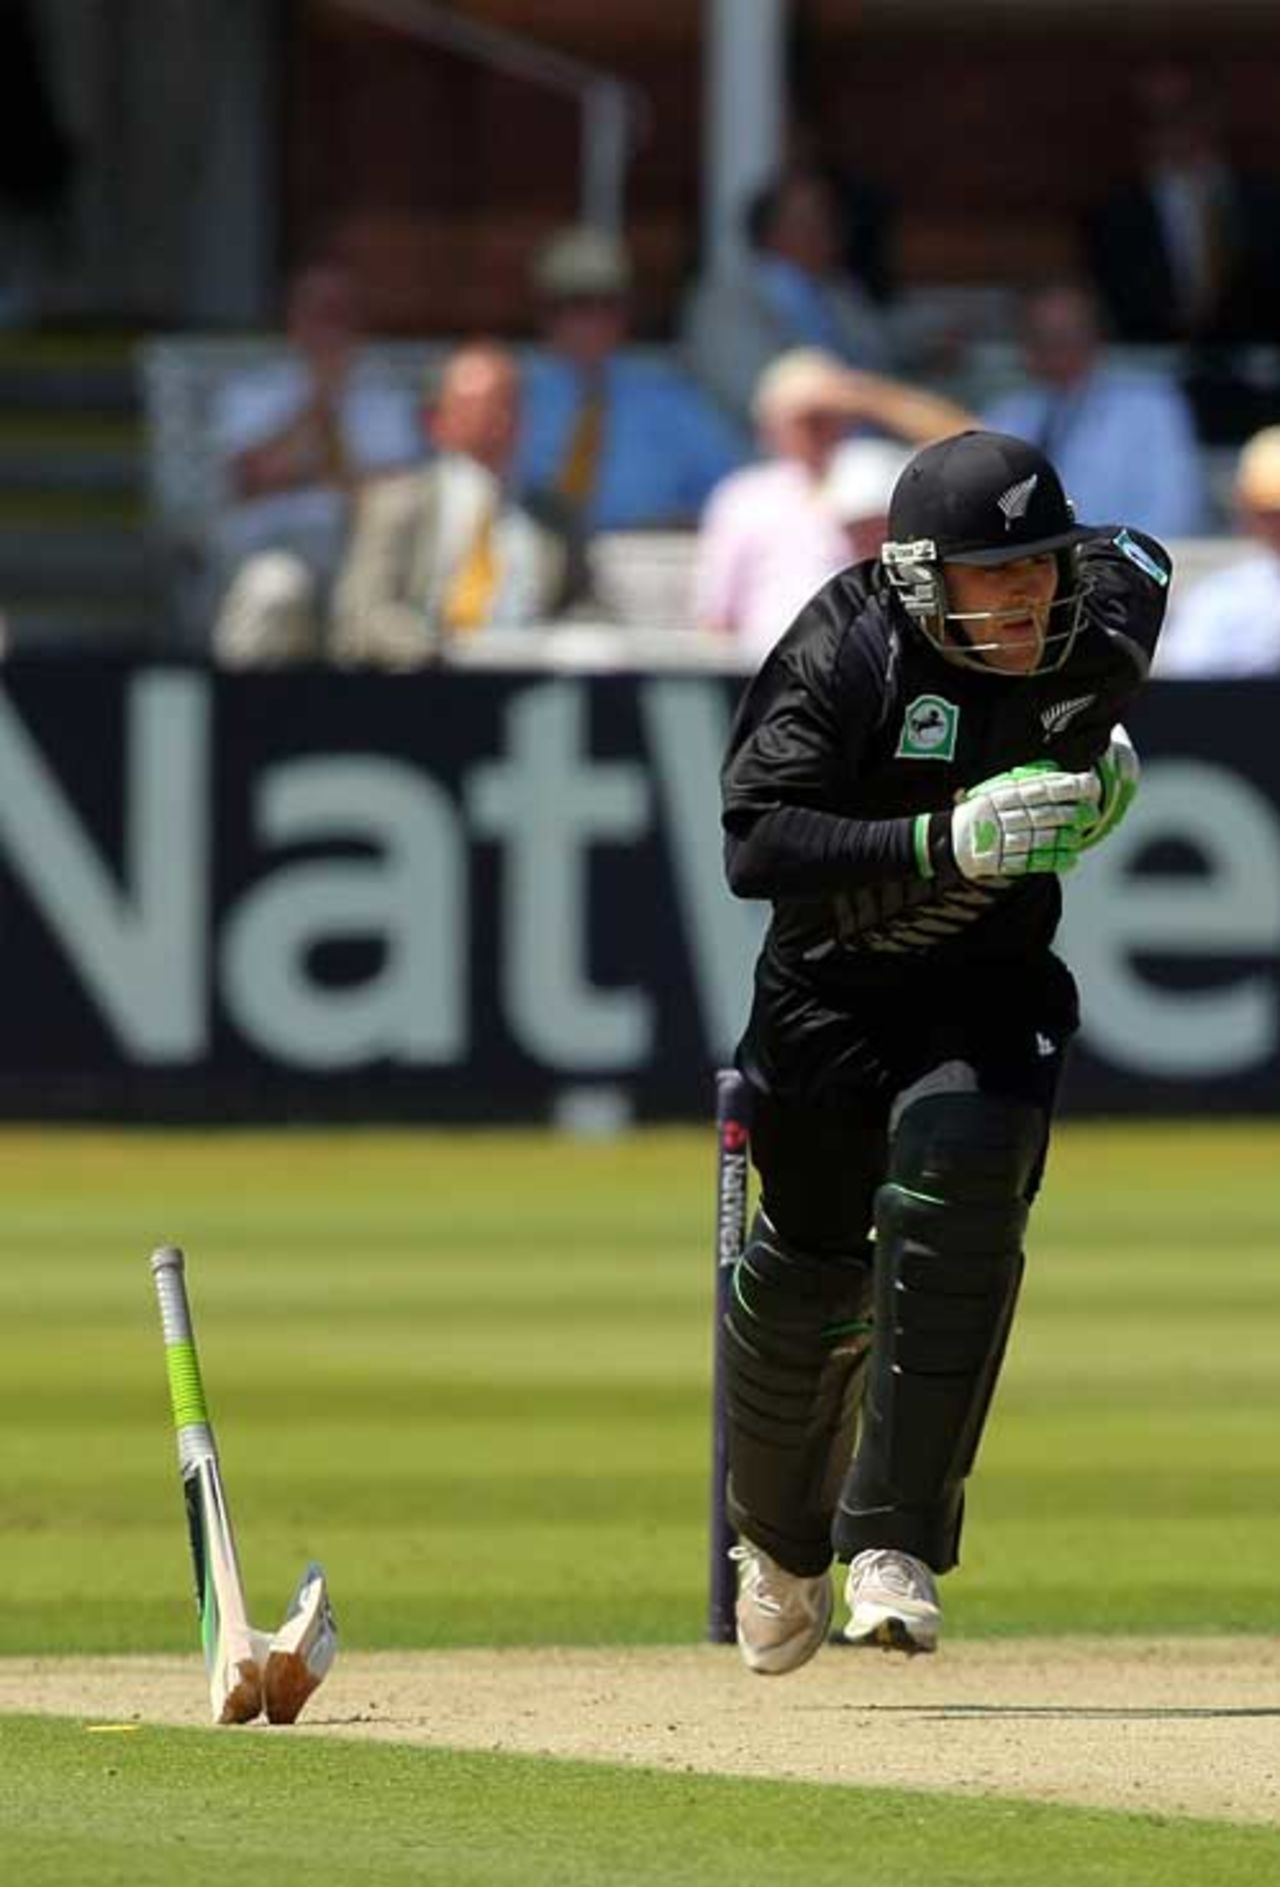 Brendon McCullum sets off for a run minus his broken bat, England v New Zealand, 5th ODI, Lord's, June 28, 2008